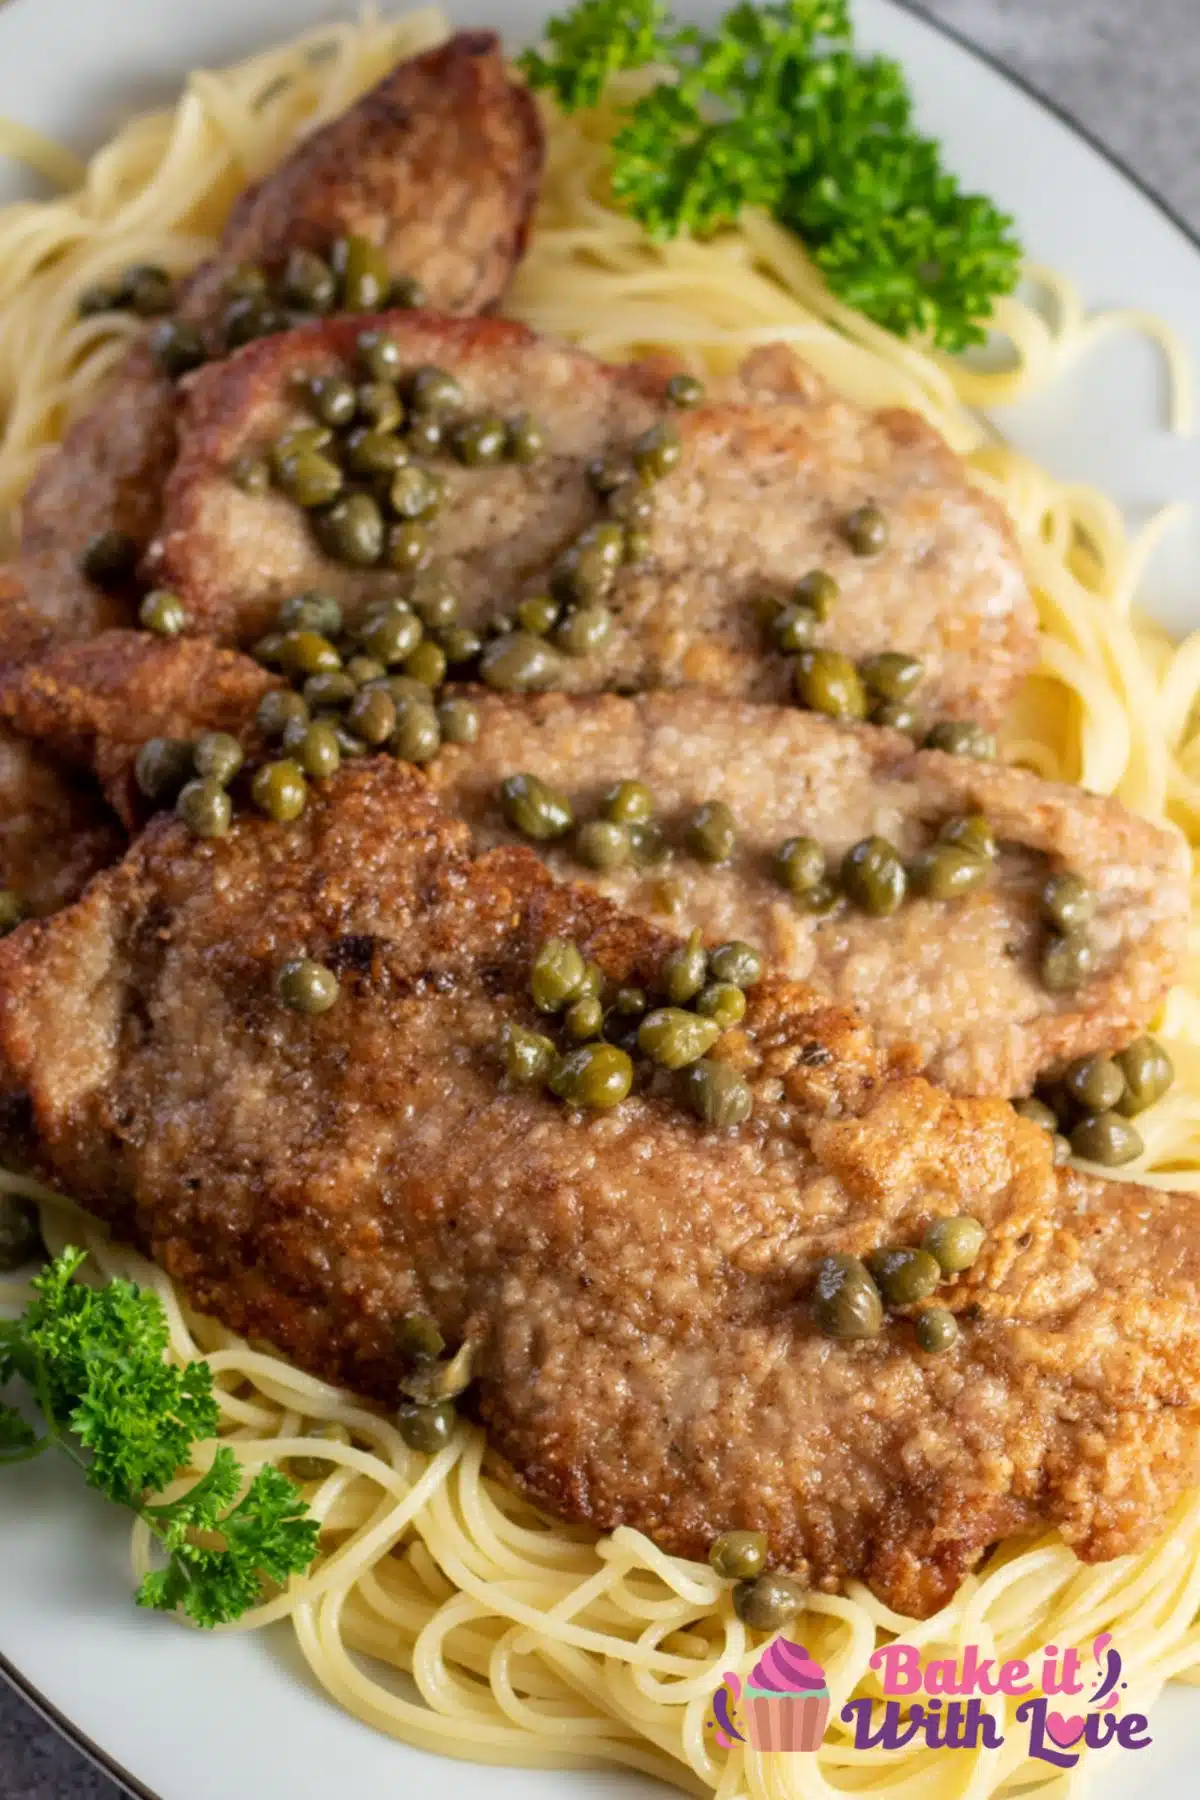 Tall image of veal scallopini on a bed of pasta.